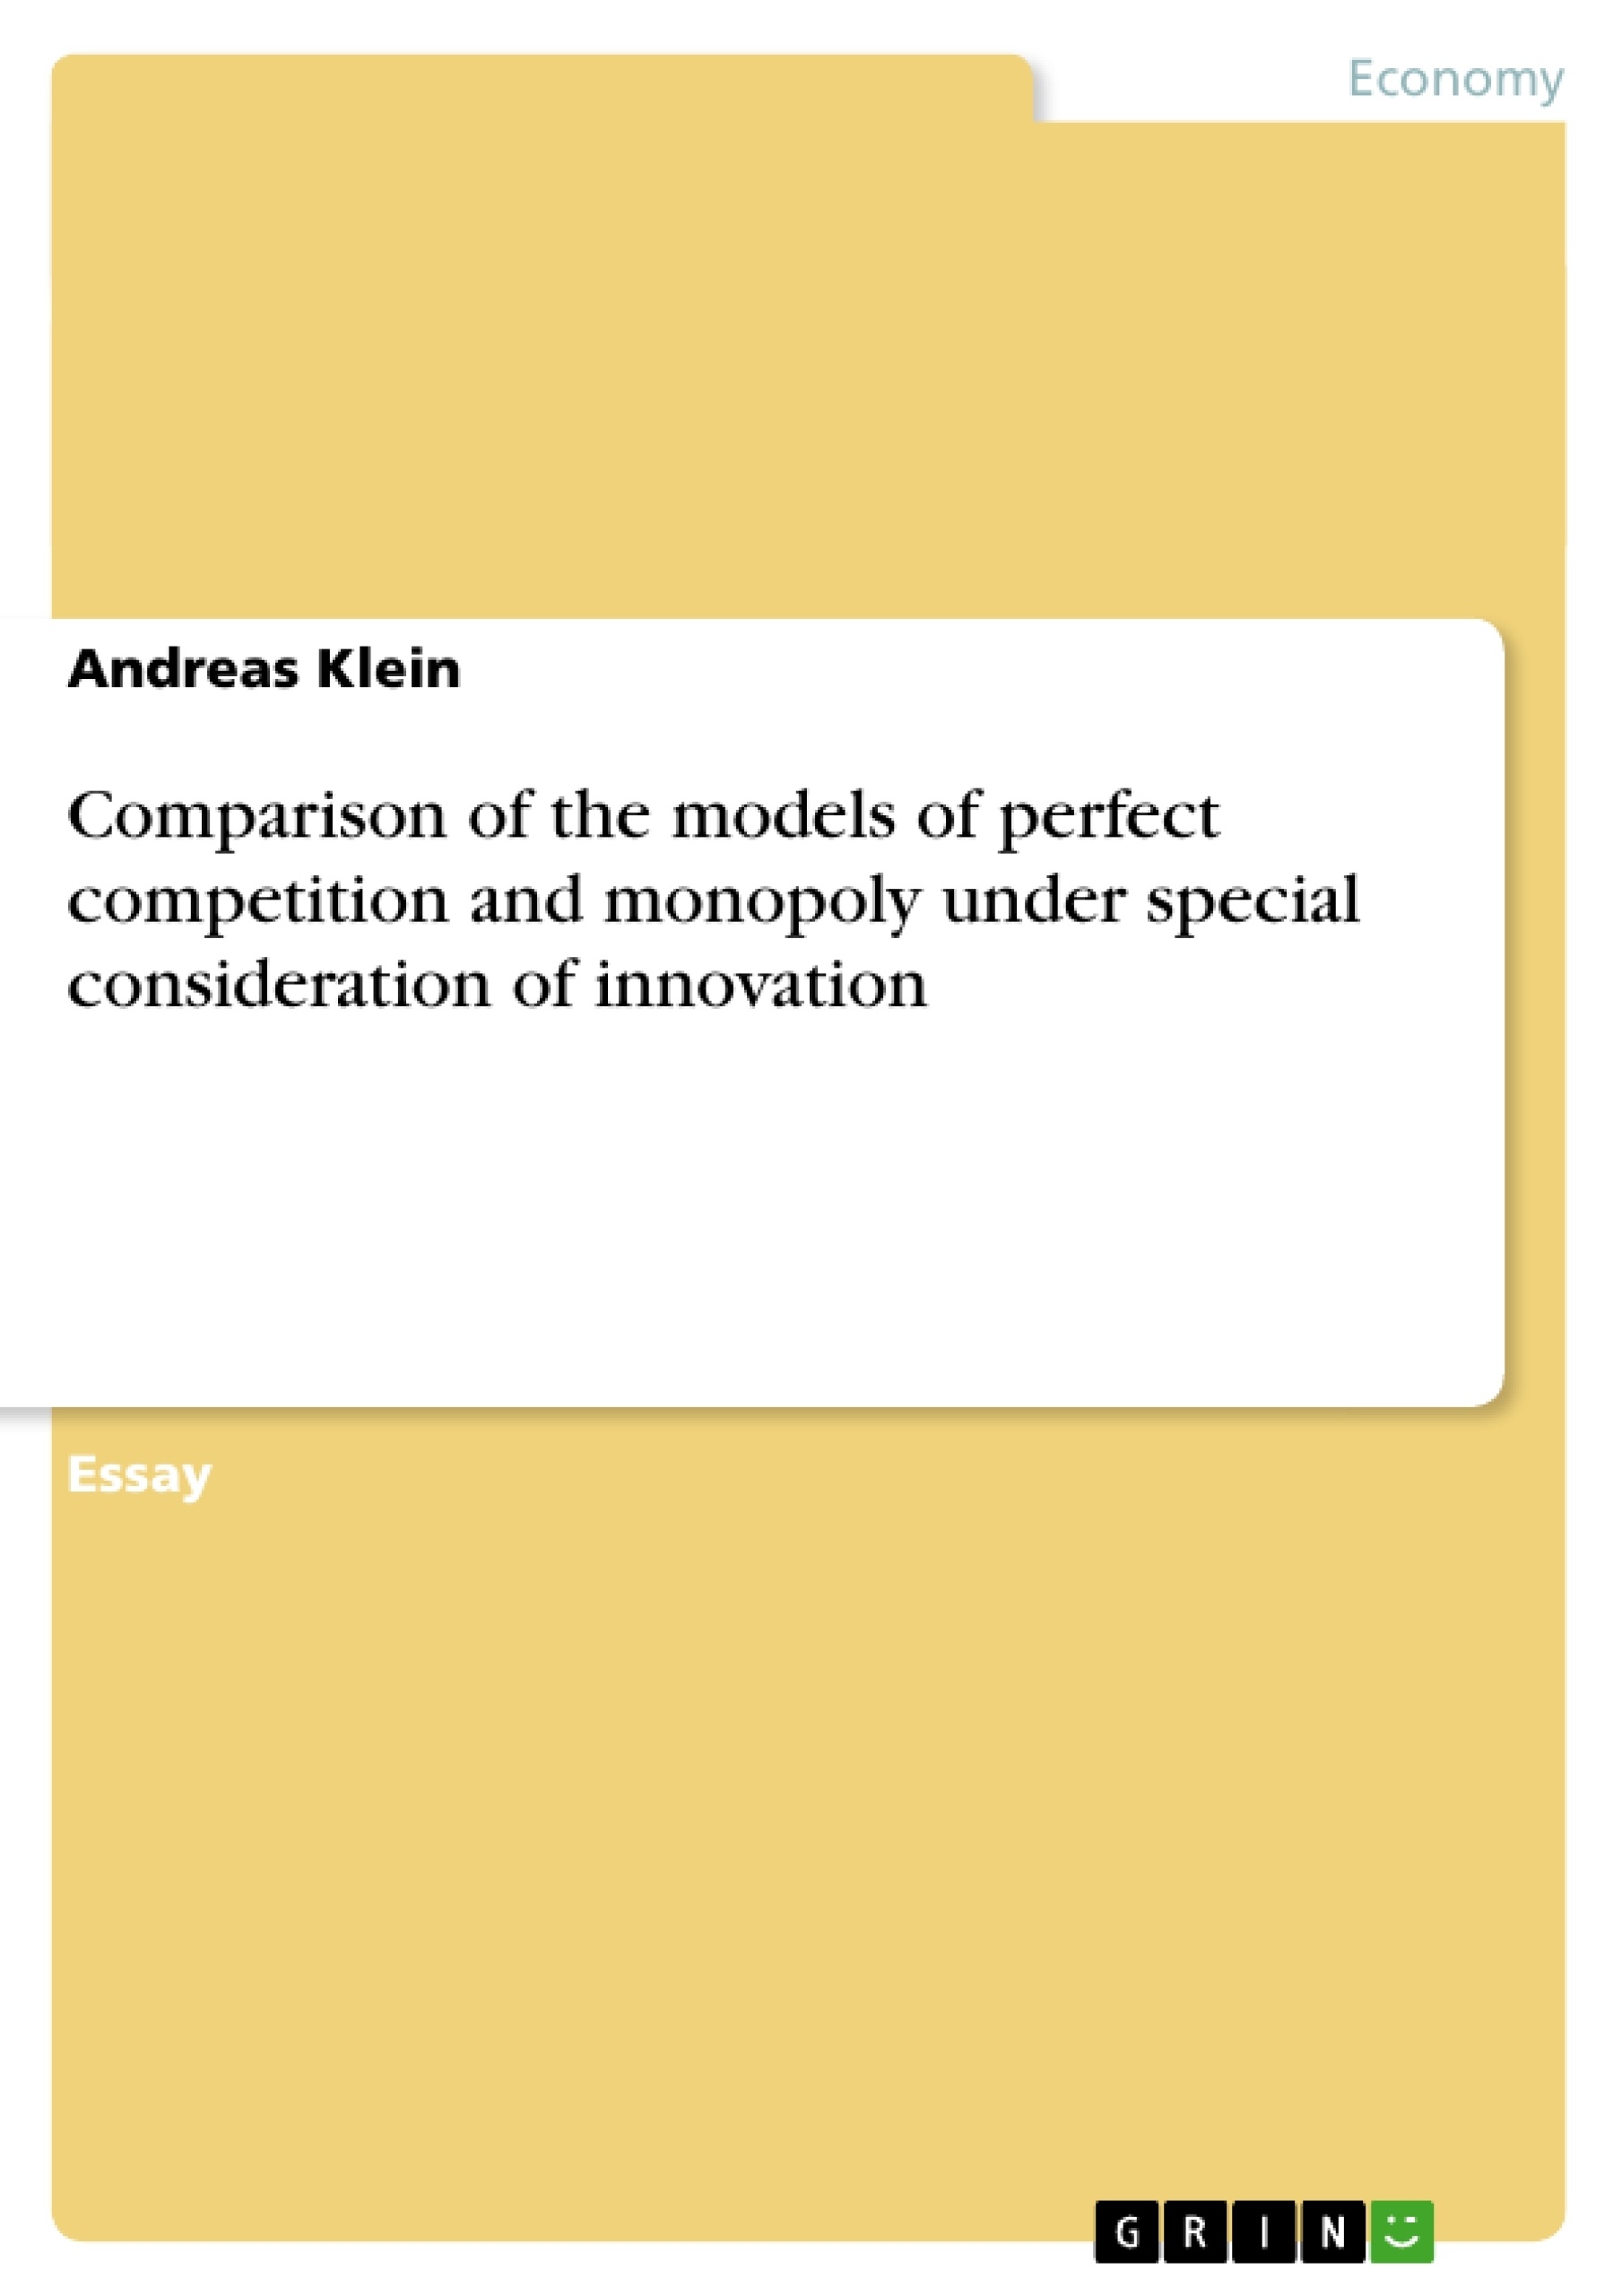 Title: Comparison of the models of perfect competition and monopoly under special consideration of innovation